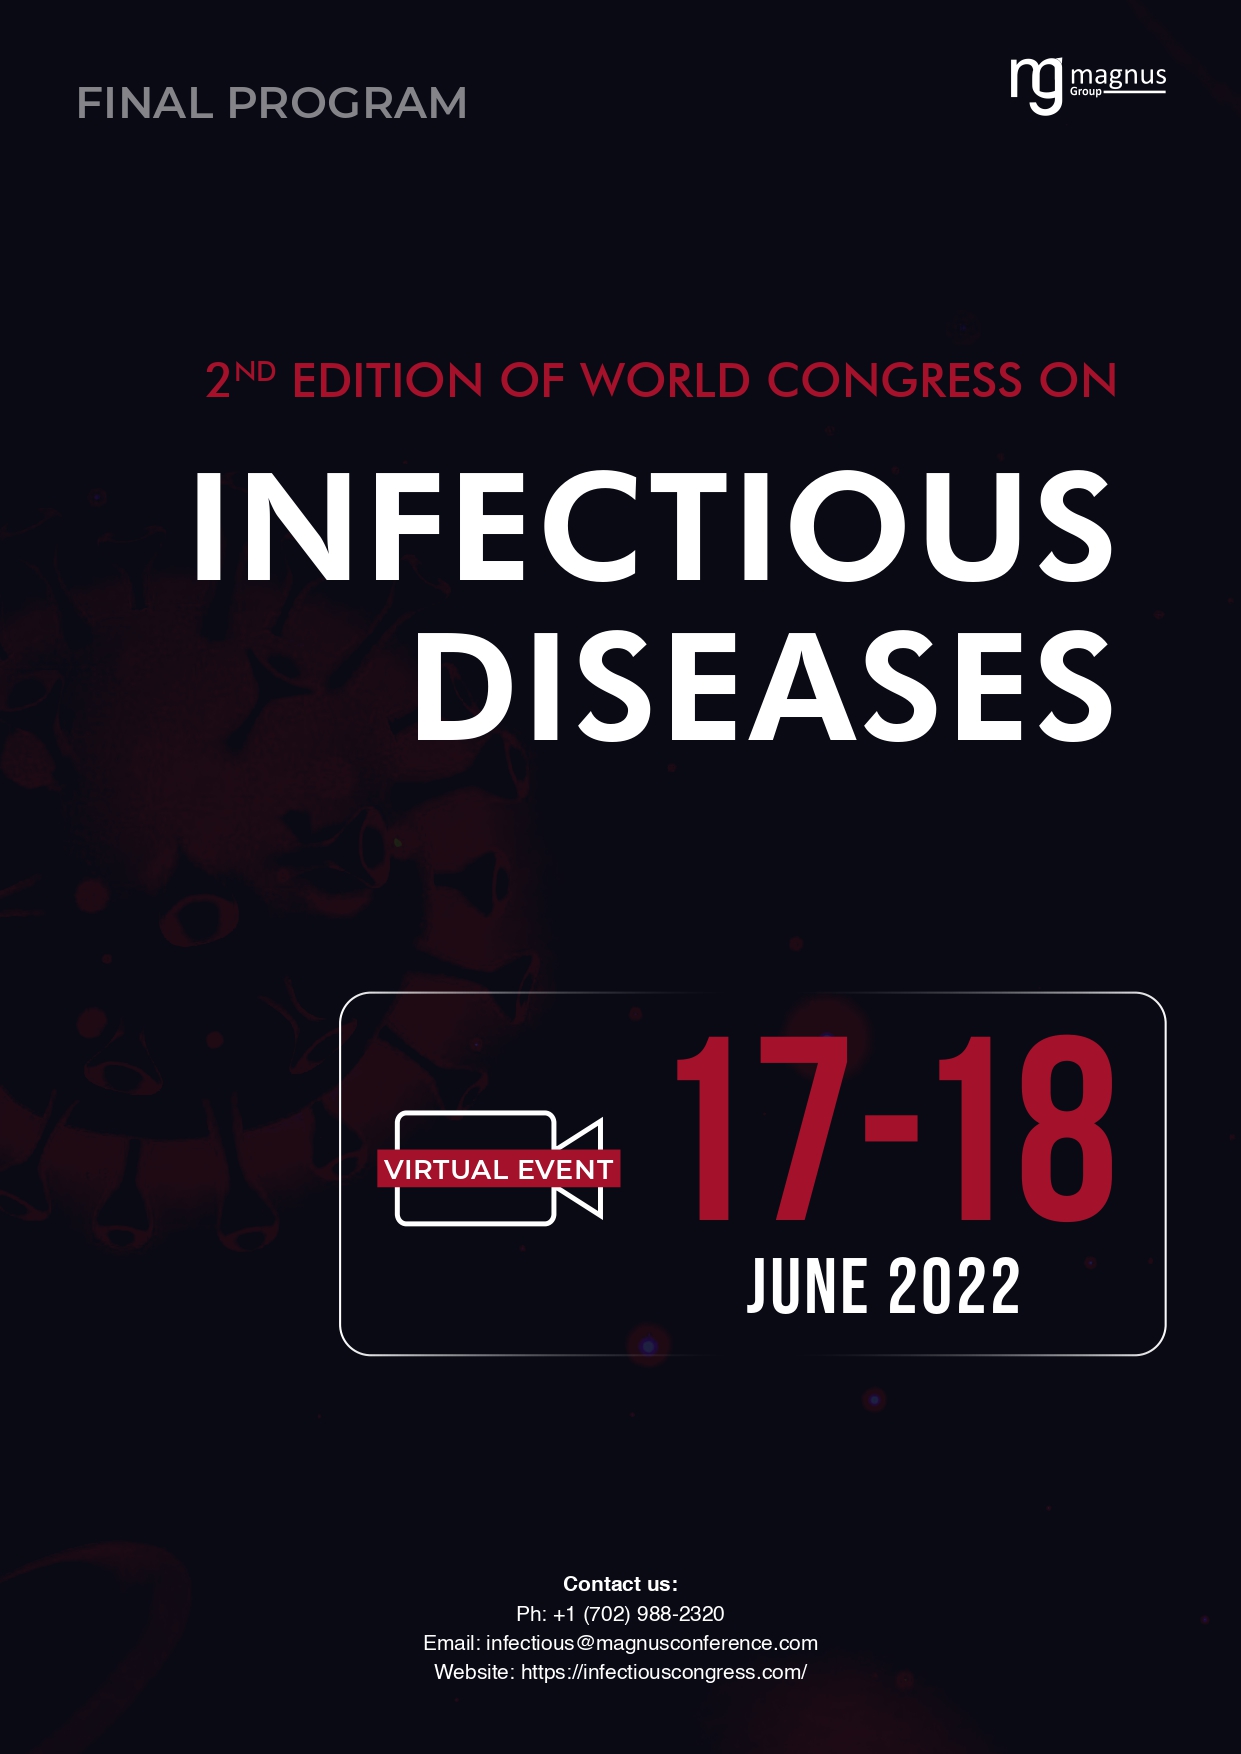 World Congress on Infectious Diseases | Virtual Event Program